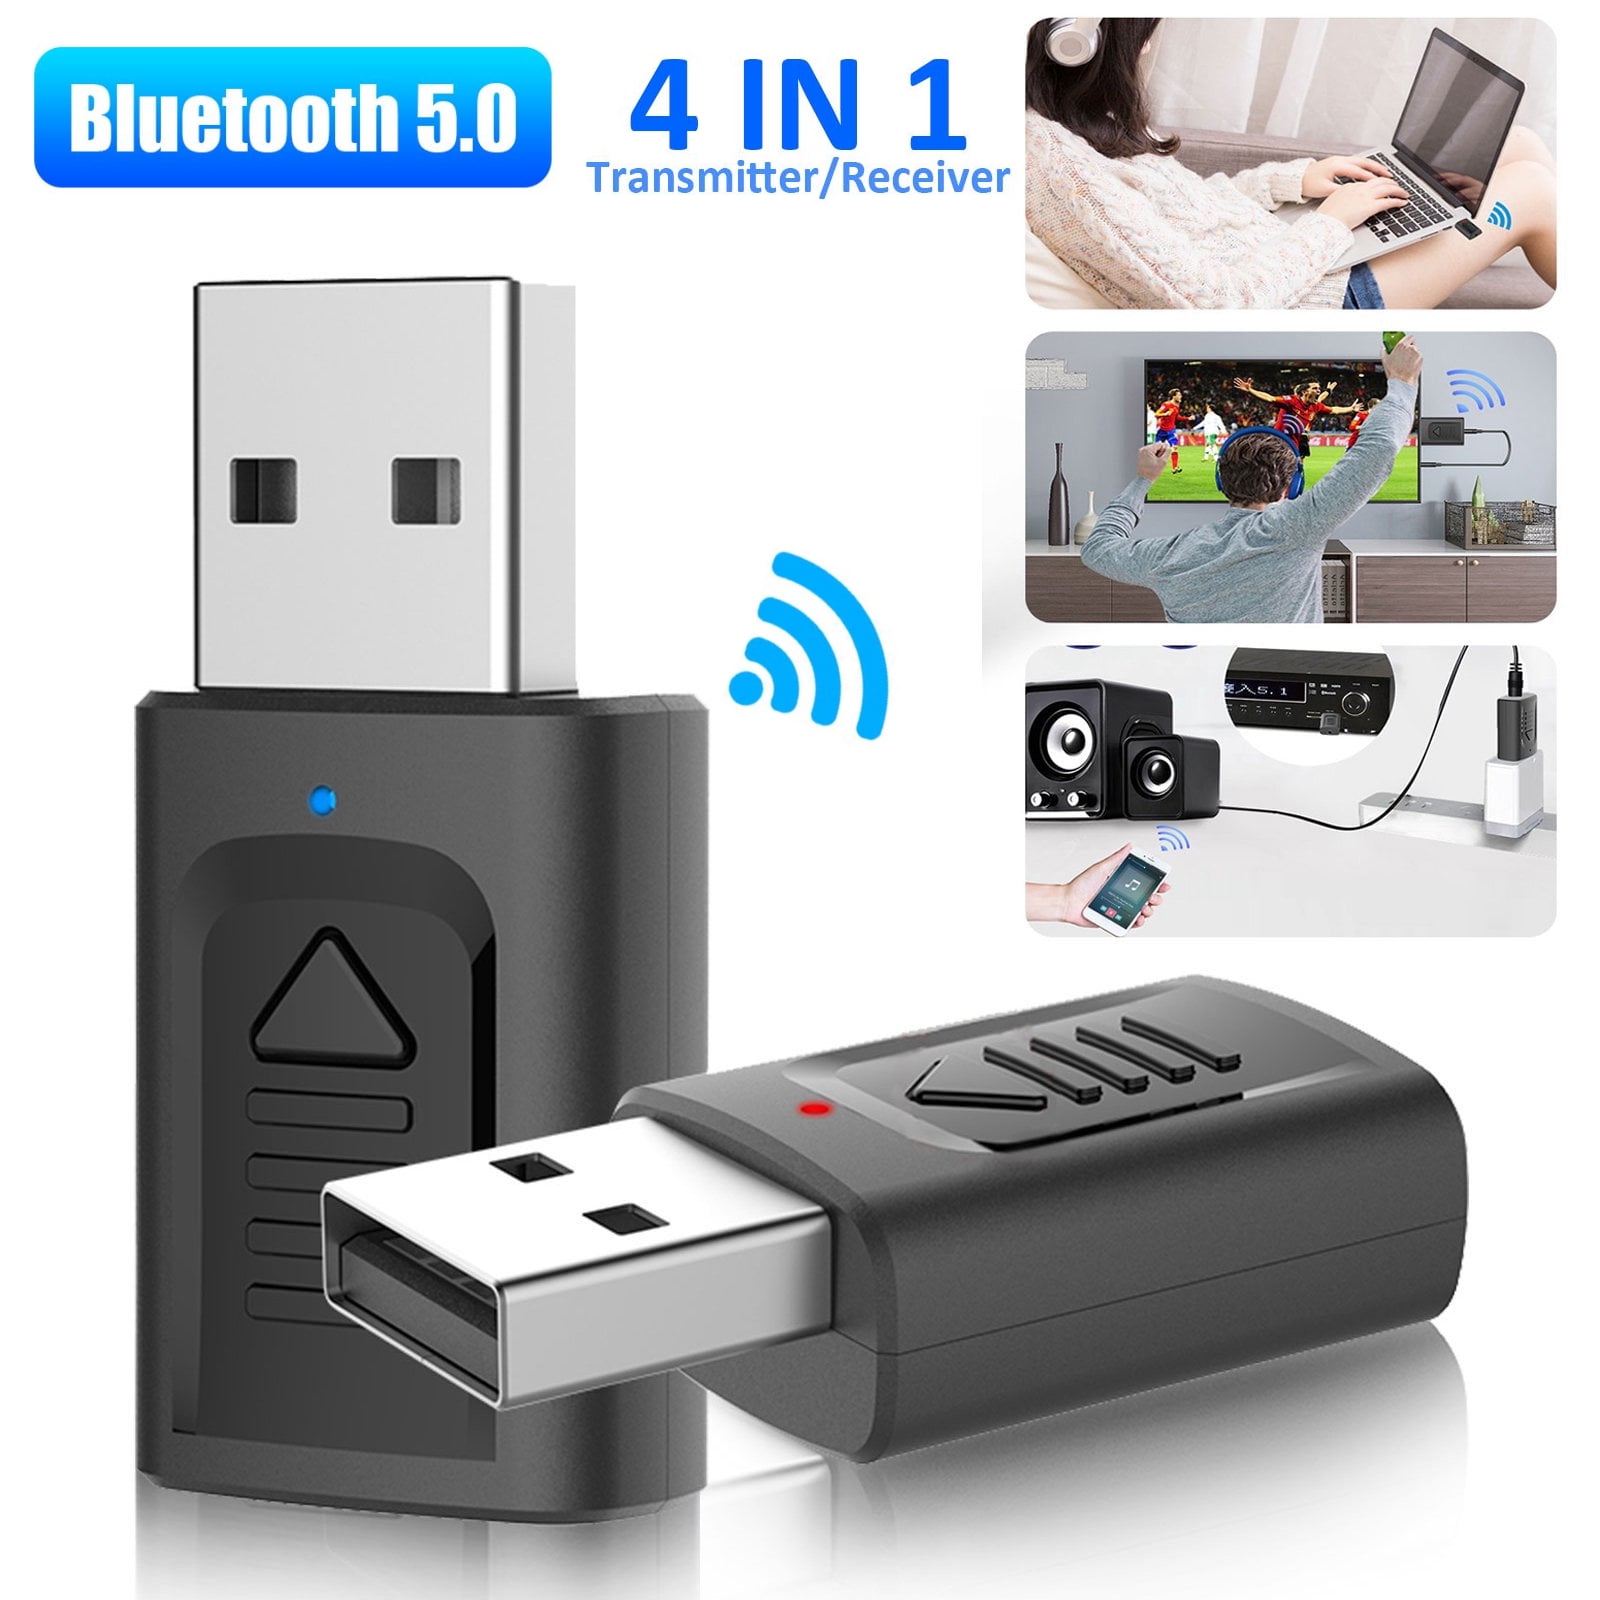 Black KINDRM 4in1 Mini USB Bluetooth 5.0 Audio Transmitter & Wireless Bluetooth 3.5mm Aux Adapter Receiver for Car/Home Stereo Headphones Speakers TV PC Projector CD Bluetooth Receiver Transmitter 